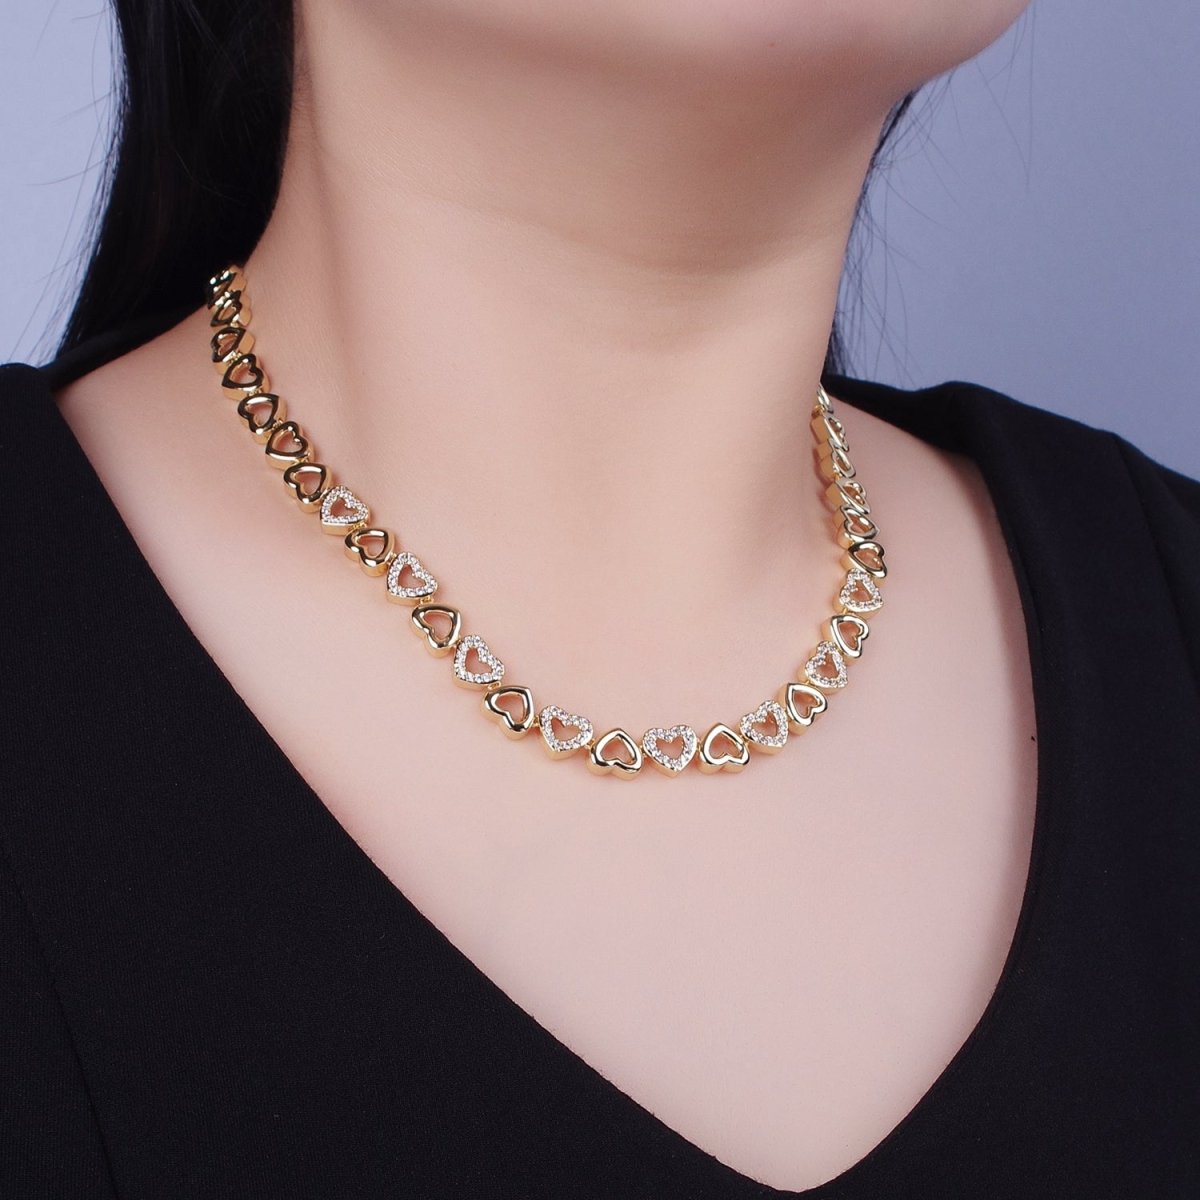 Chunky Gold Open Heart Links Necklace with Cz Pave Diamond Heart Center Necklace for Layering Necklace WA-1088 - DLUXCA